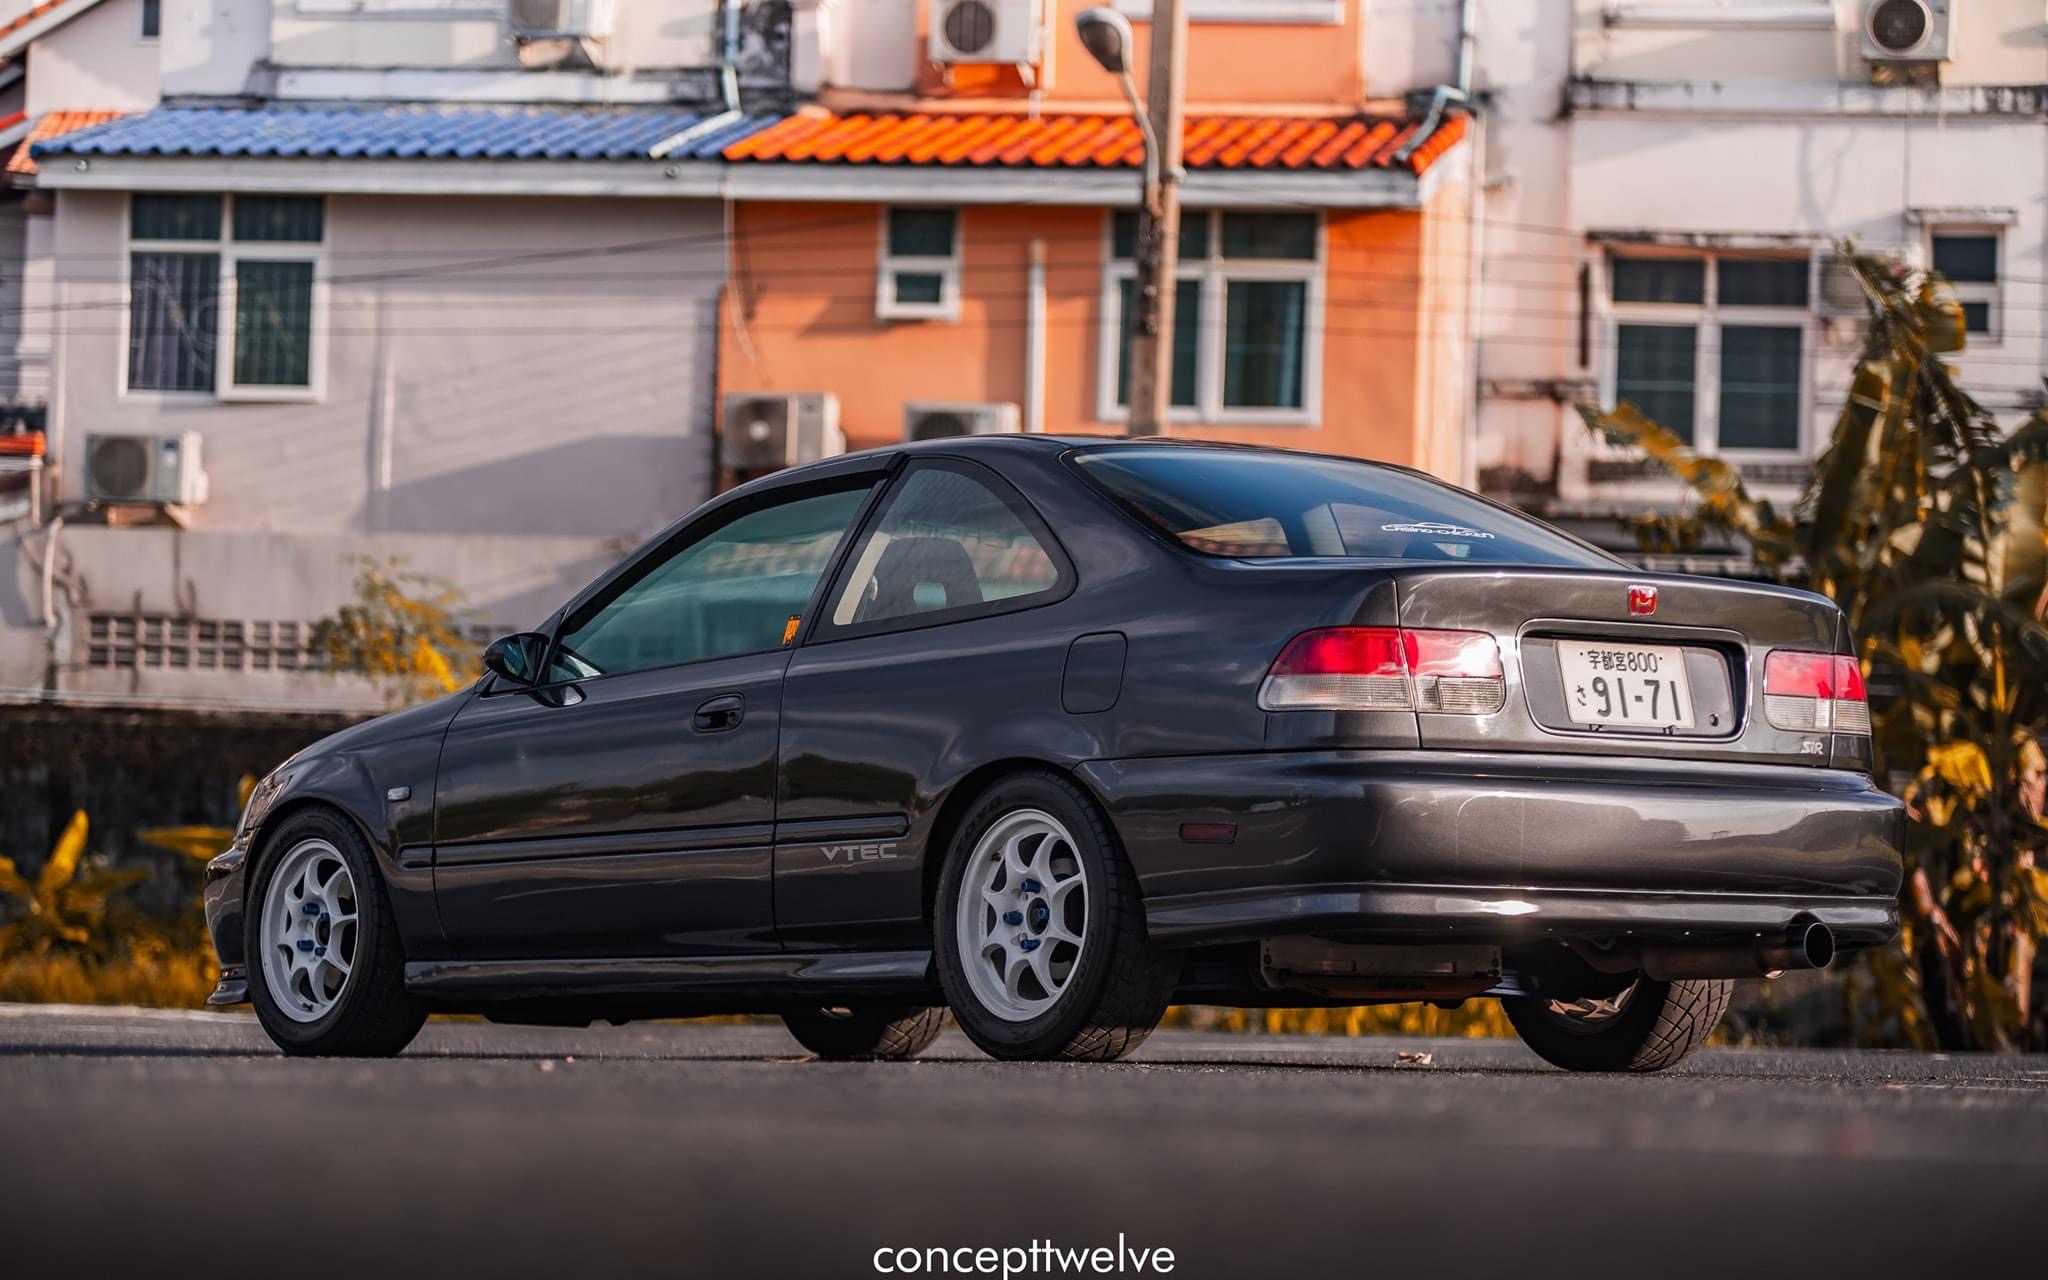 CIVIC COUPE Si ปี2000